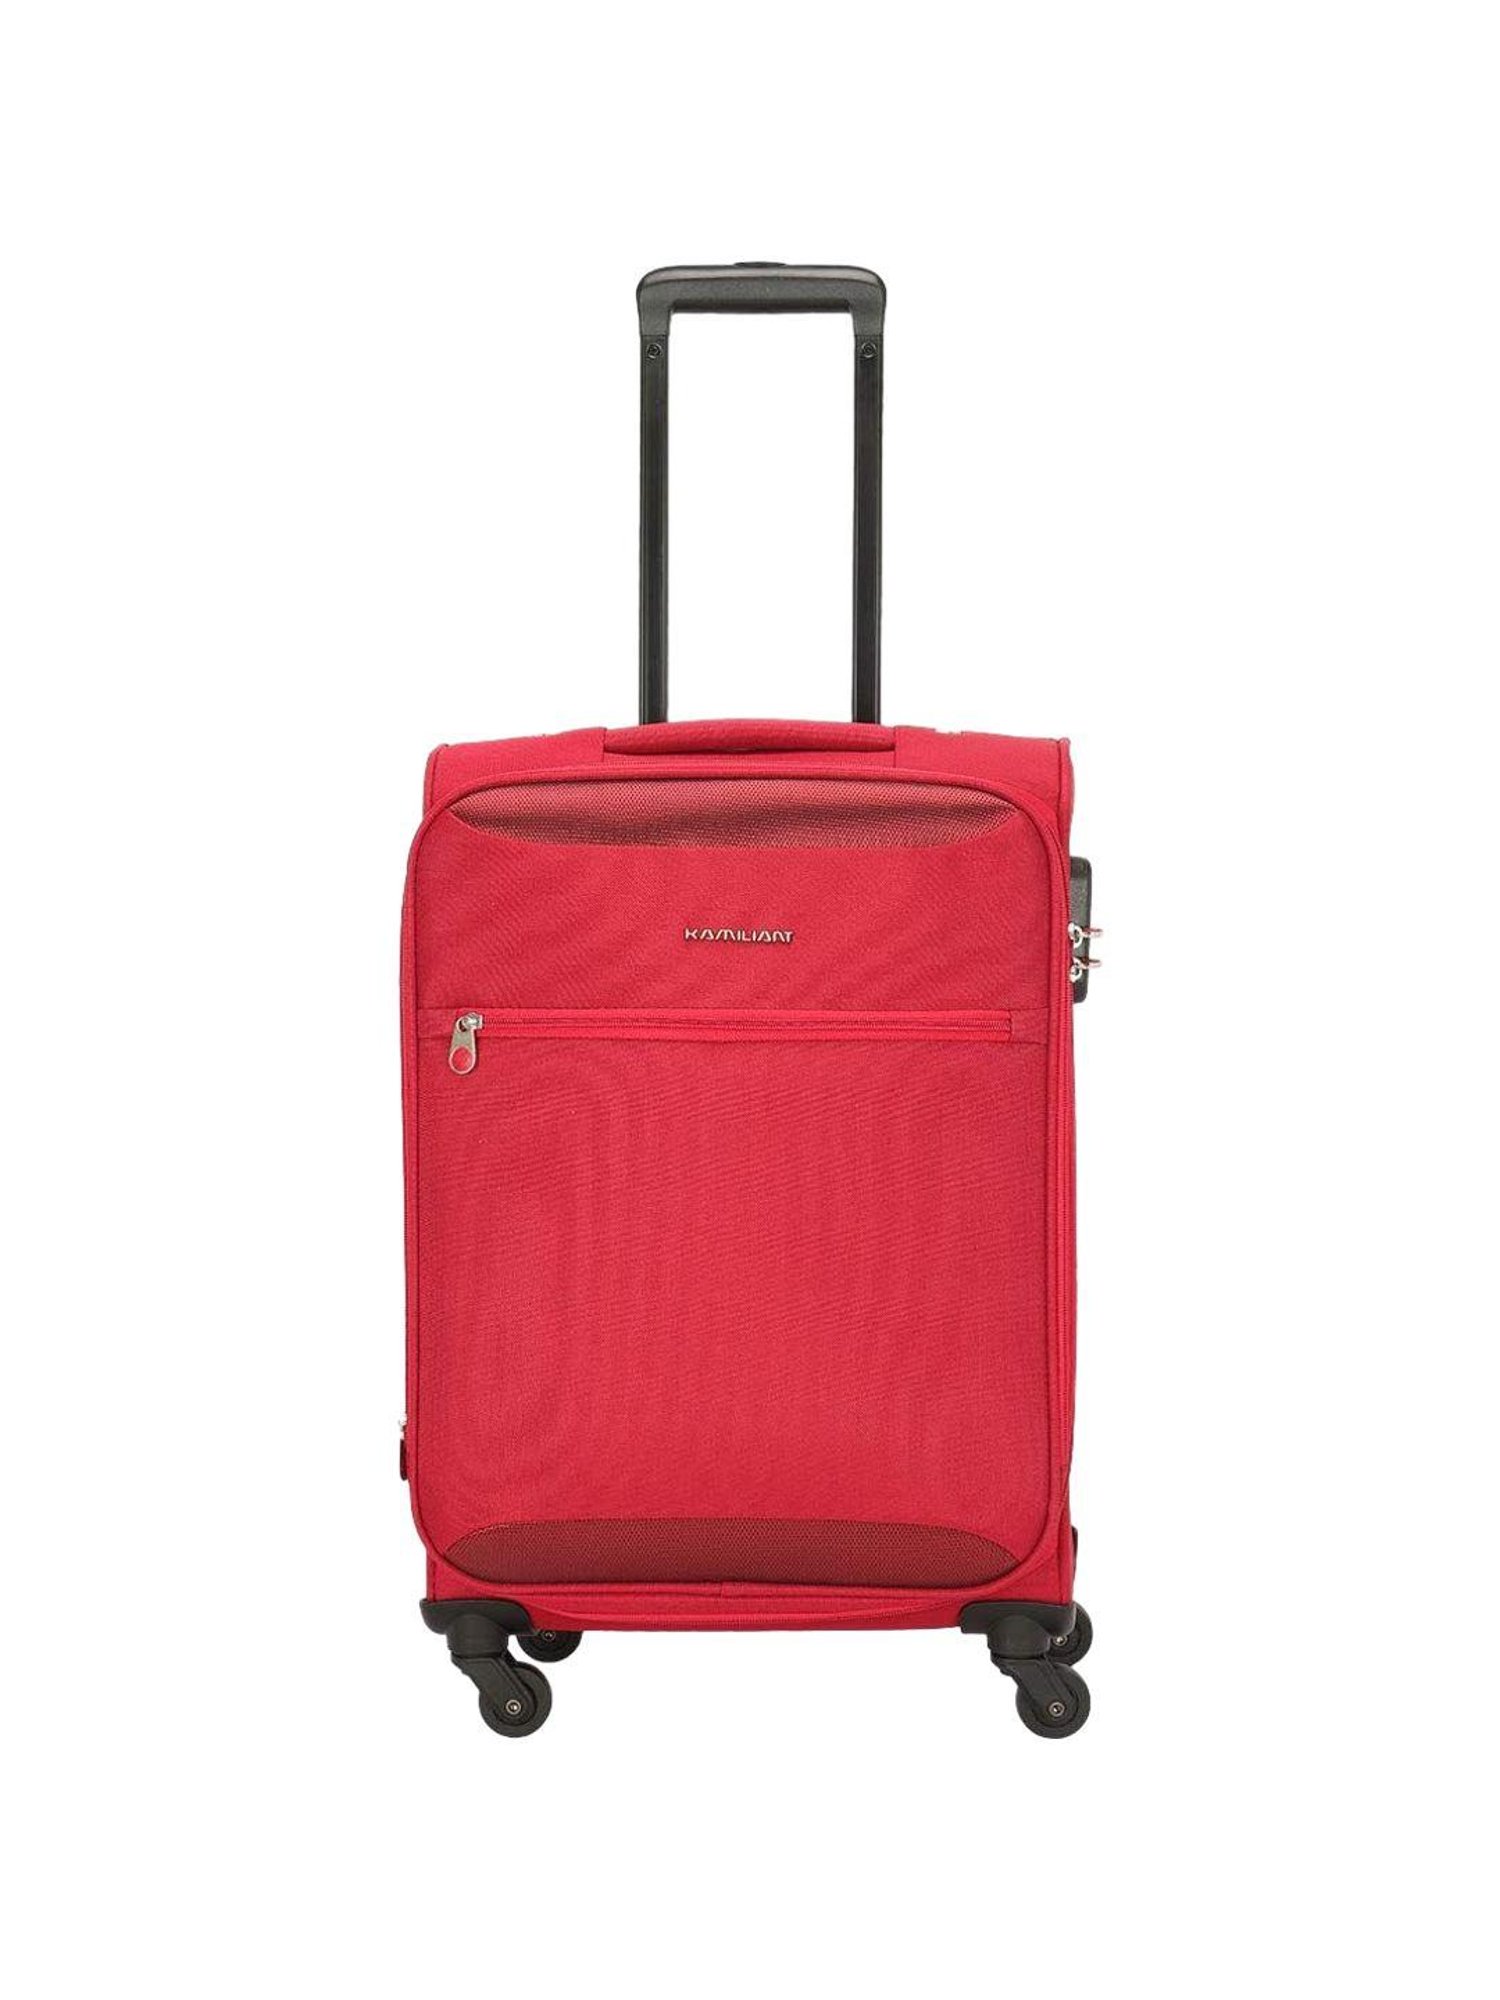 Kamiliant Soft Upright Gaho Luggage in bulk for corporate gifting |  Kamiliant Trolley Bag, Suitcase wholesale distributor & supplier in Mumbai  India